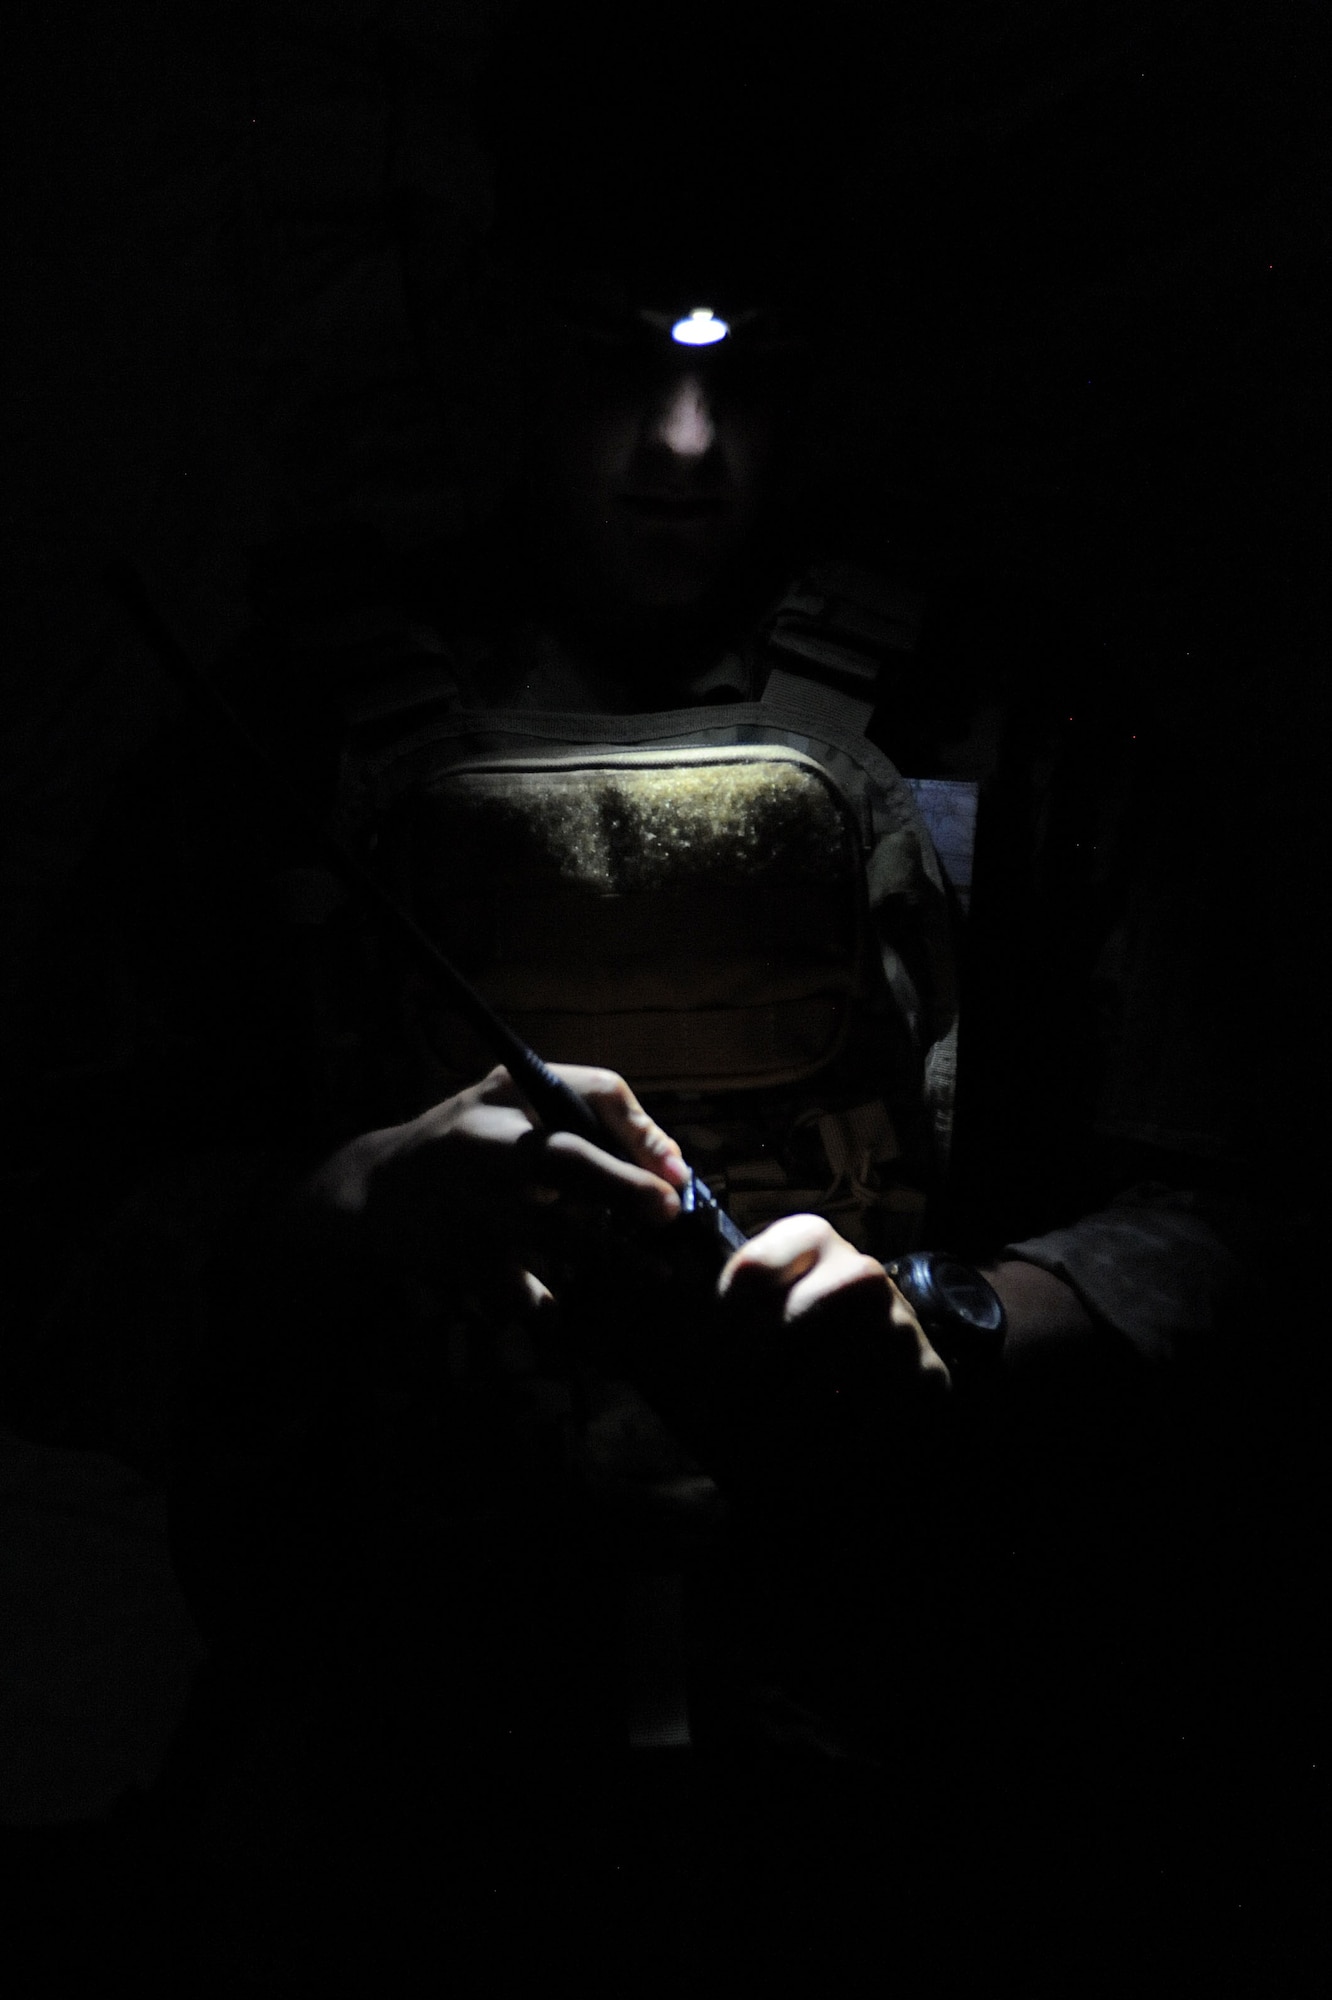 Airman 1st Class Benjamin Anderson, 10th Air Support Operations Squadron joint terminal attack controller, reads a map inside an operation center, June 22, 2016, at Fort Riley, Kan. Tenth ASOS JTAC Airmen conducted field and convoy exercises to maintain readiness as tactical air control party operators. (U.S. Air Force photo/Airman 1st Class Jenna K. Caldwell)